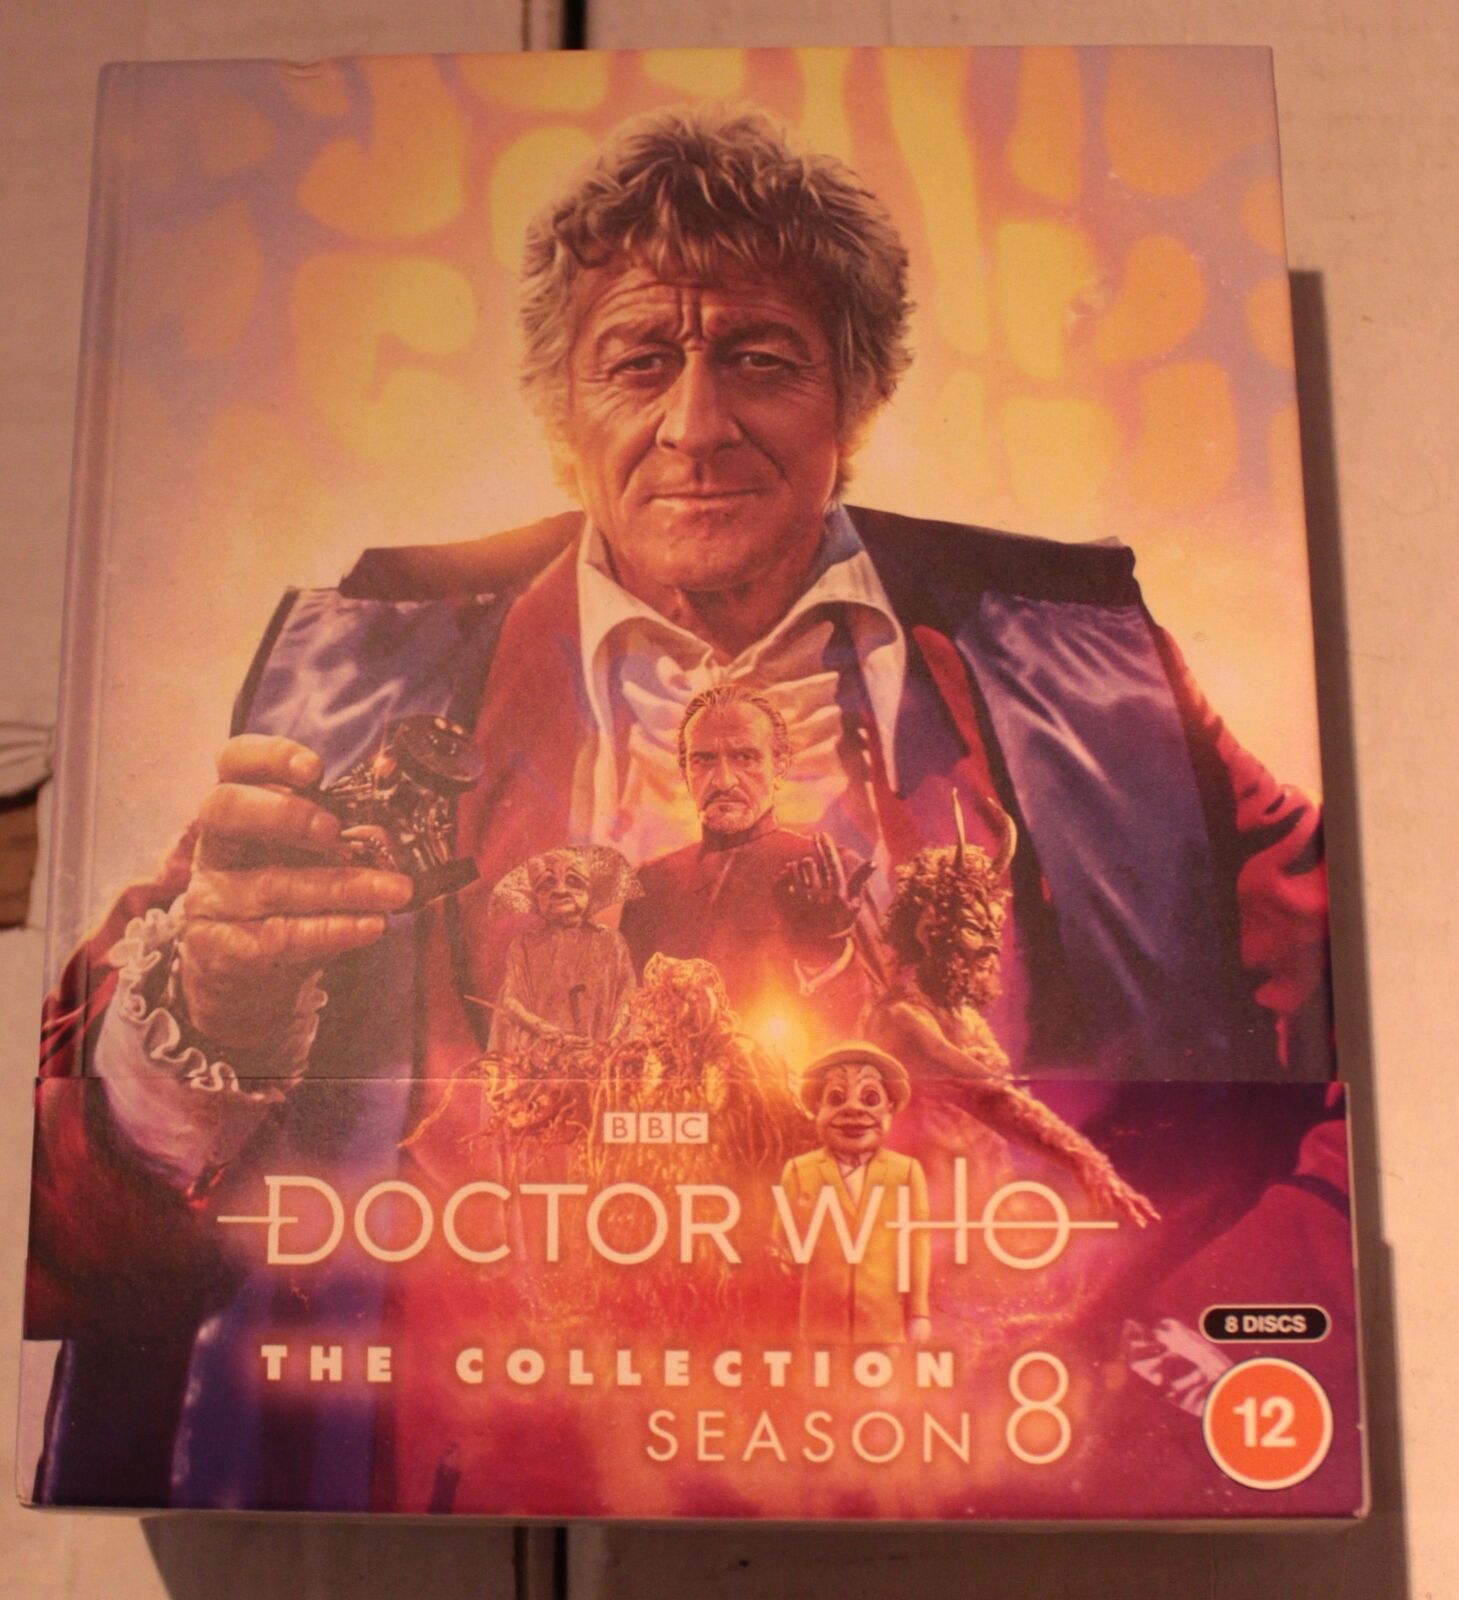 Doctor Who:  The Collection Season 8 - Boxset Blu Ray OOP  Region Free